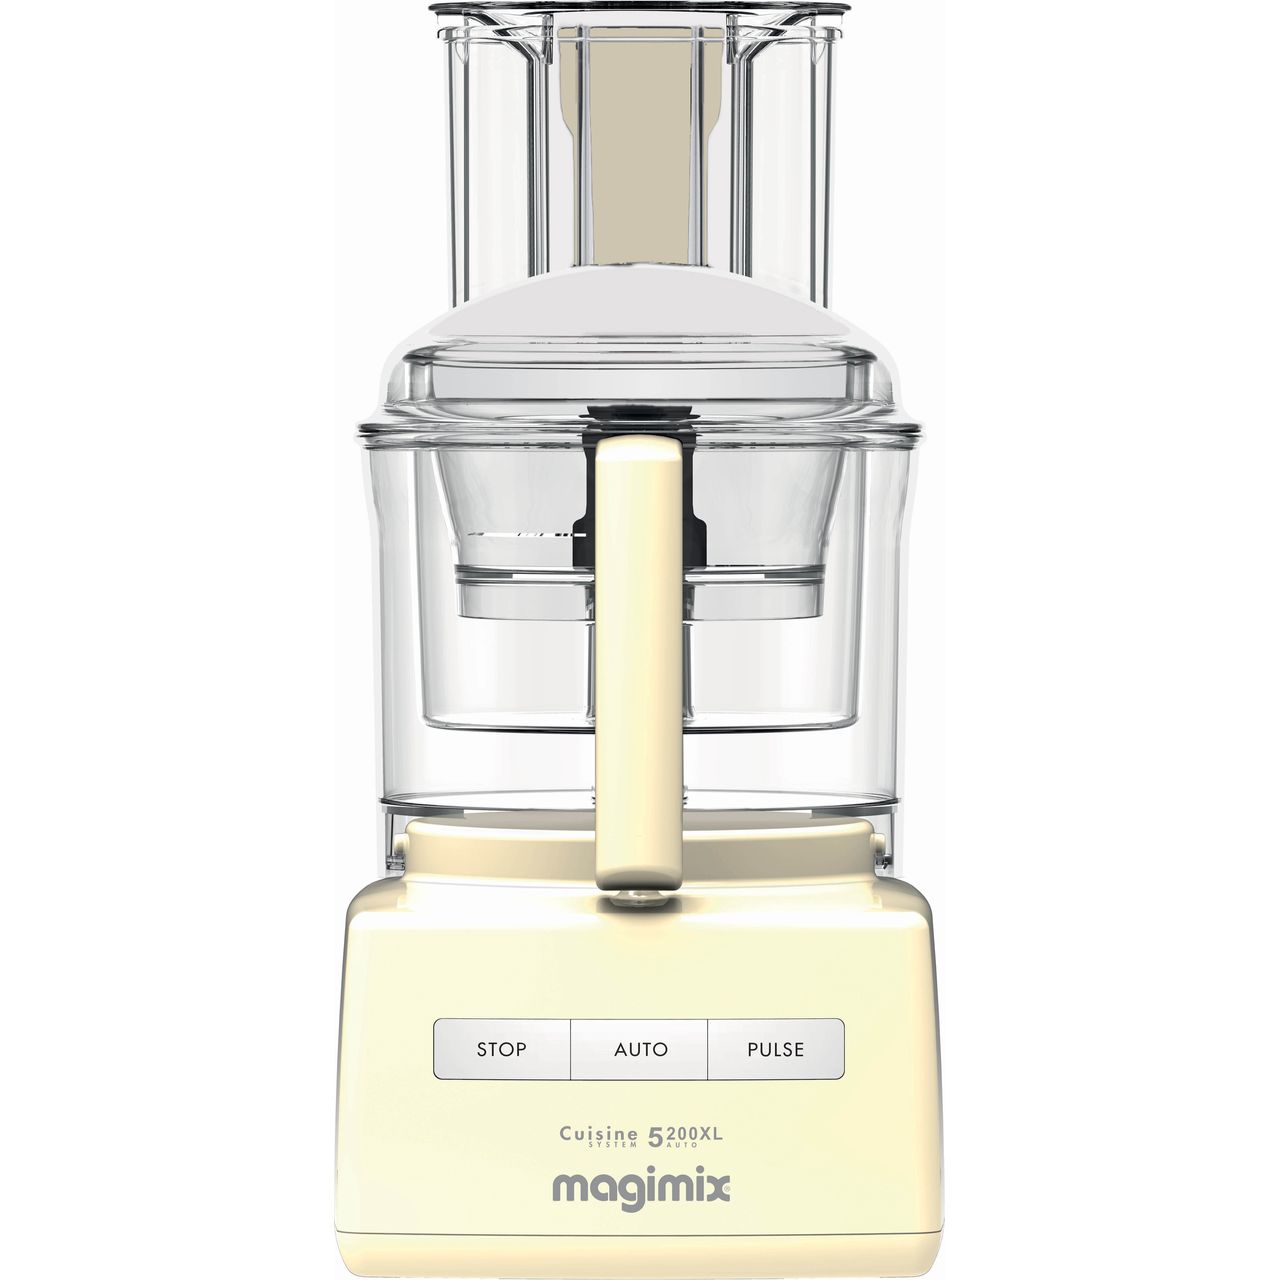 Magimix 5200XL 18583 3.6 Litre Food Processor With 12 Accessories Review